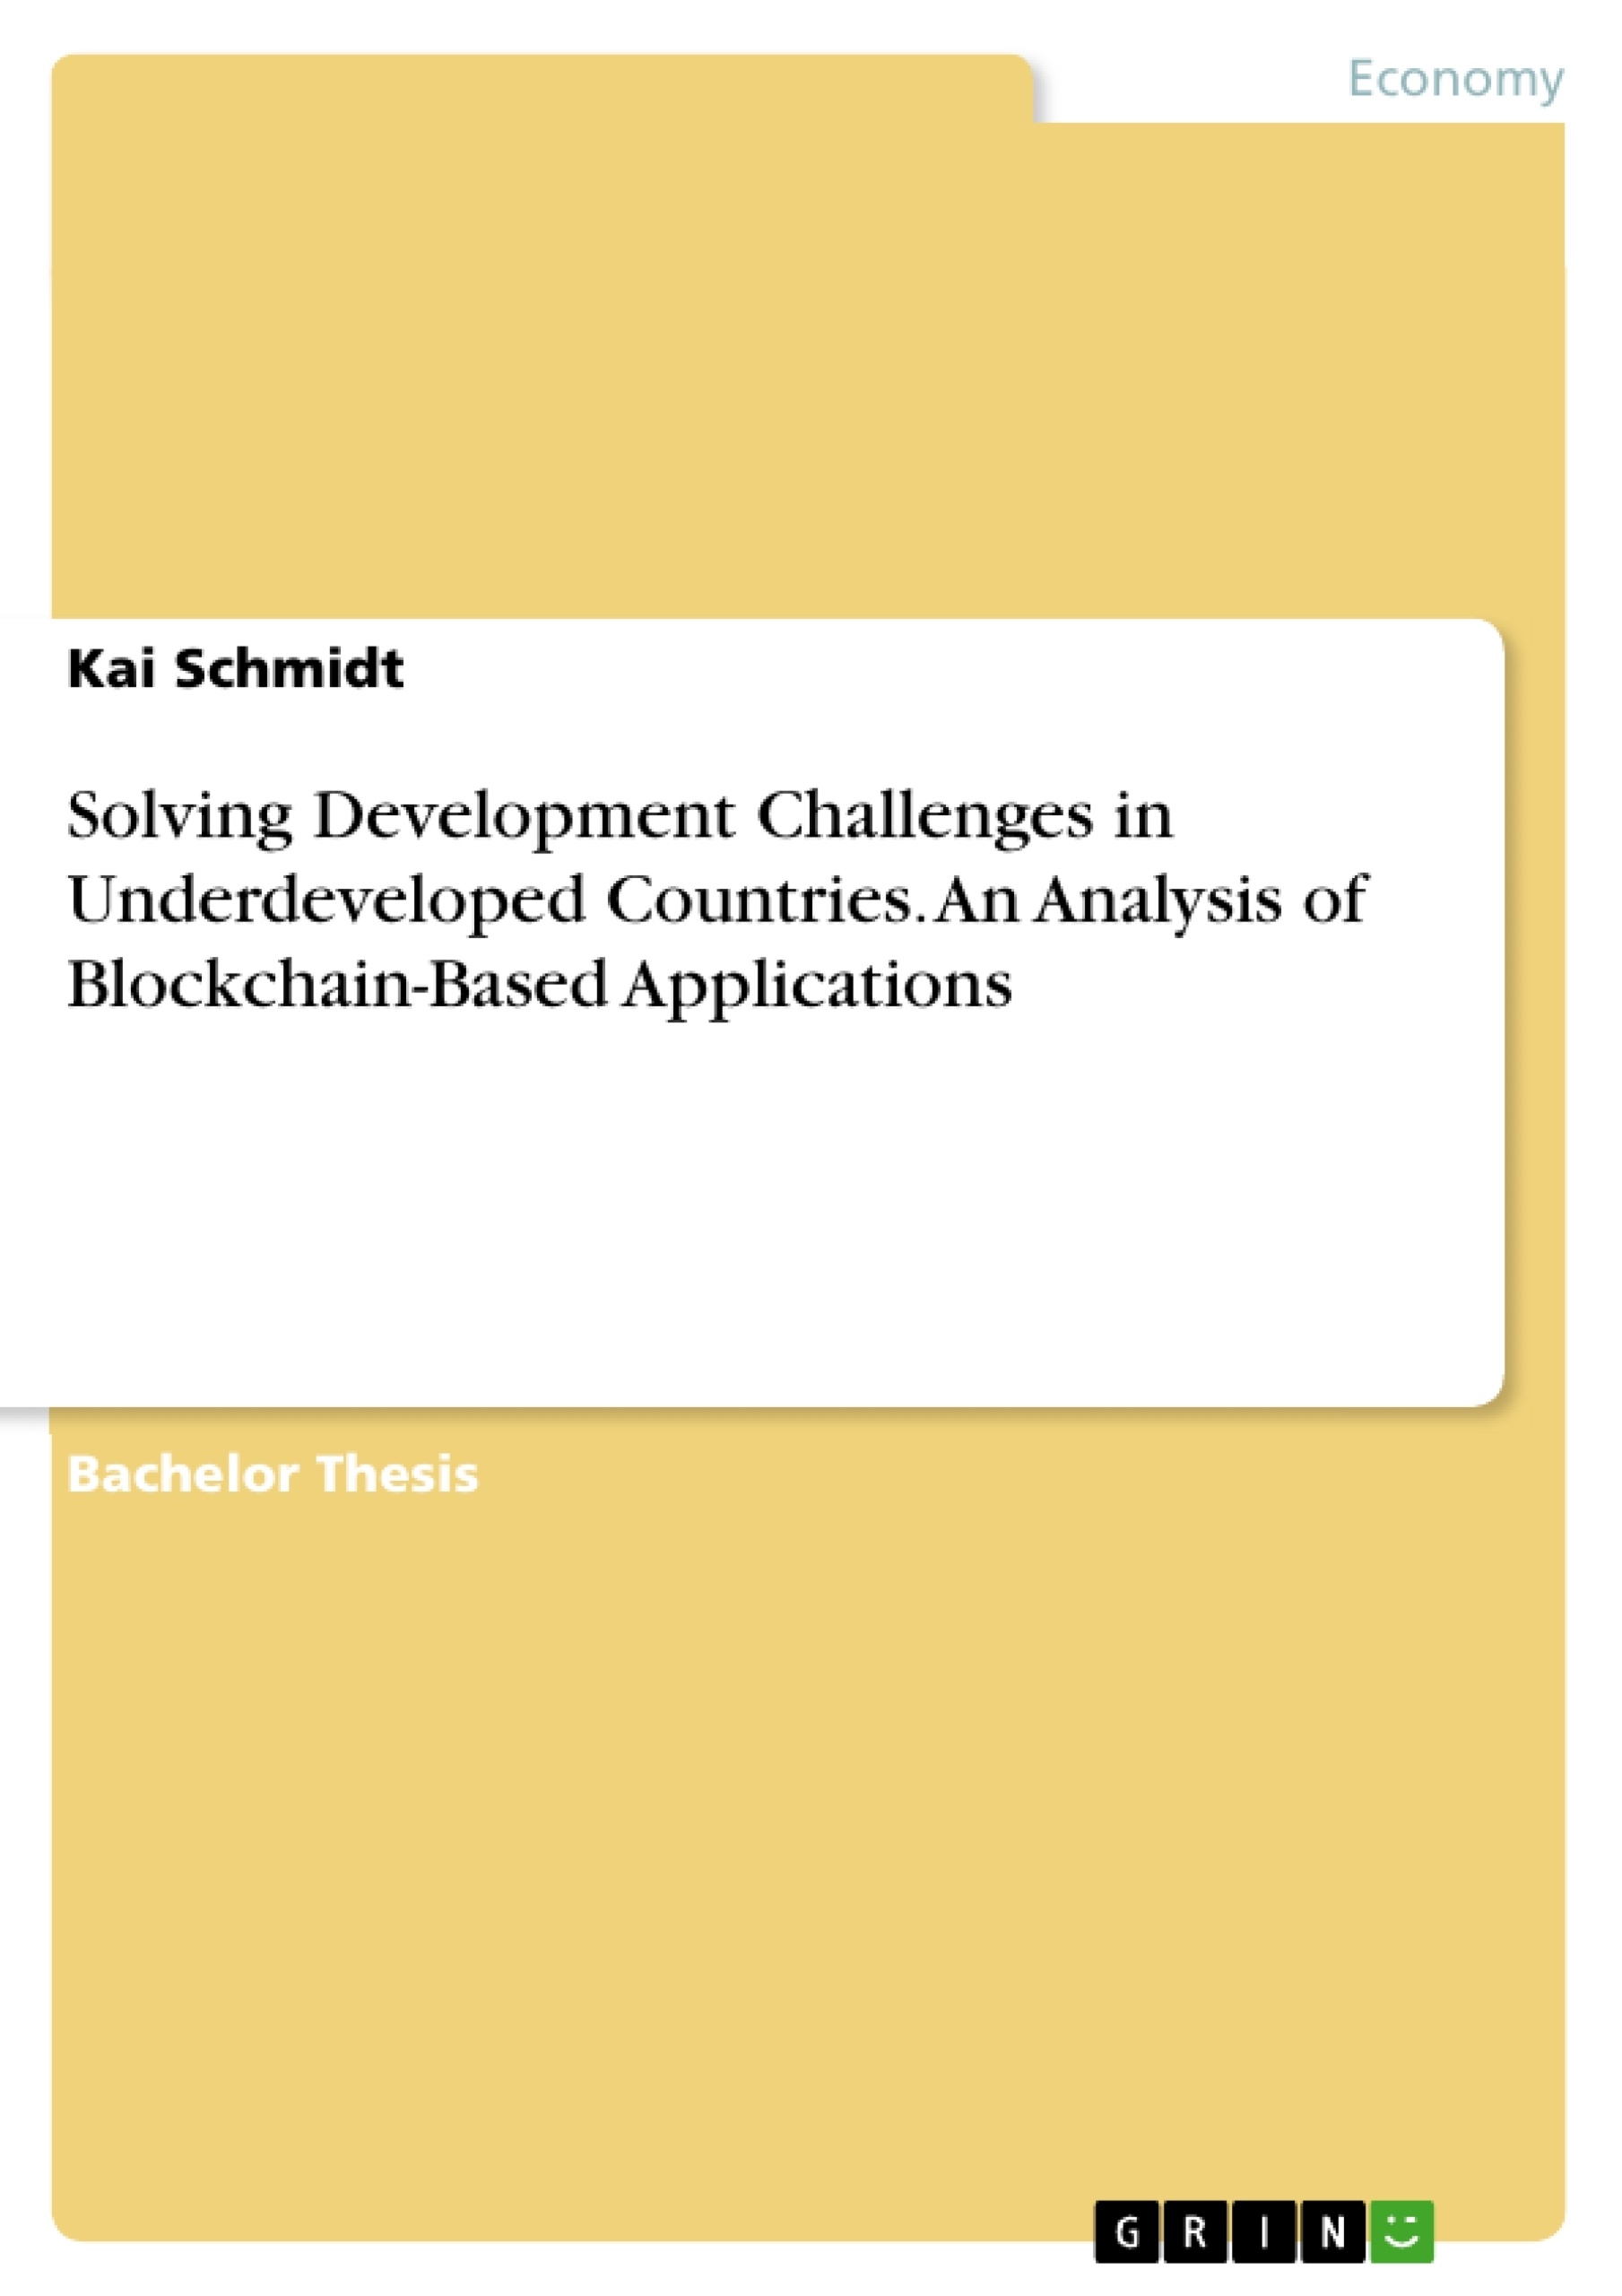 Titre: Solving Development Challenges in Underdeveloped Countries. An Analysis of Blockchain-Based Applications